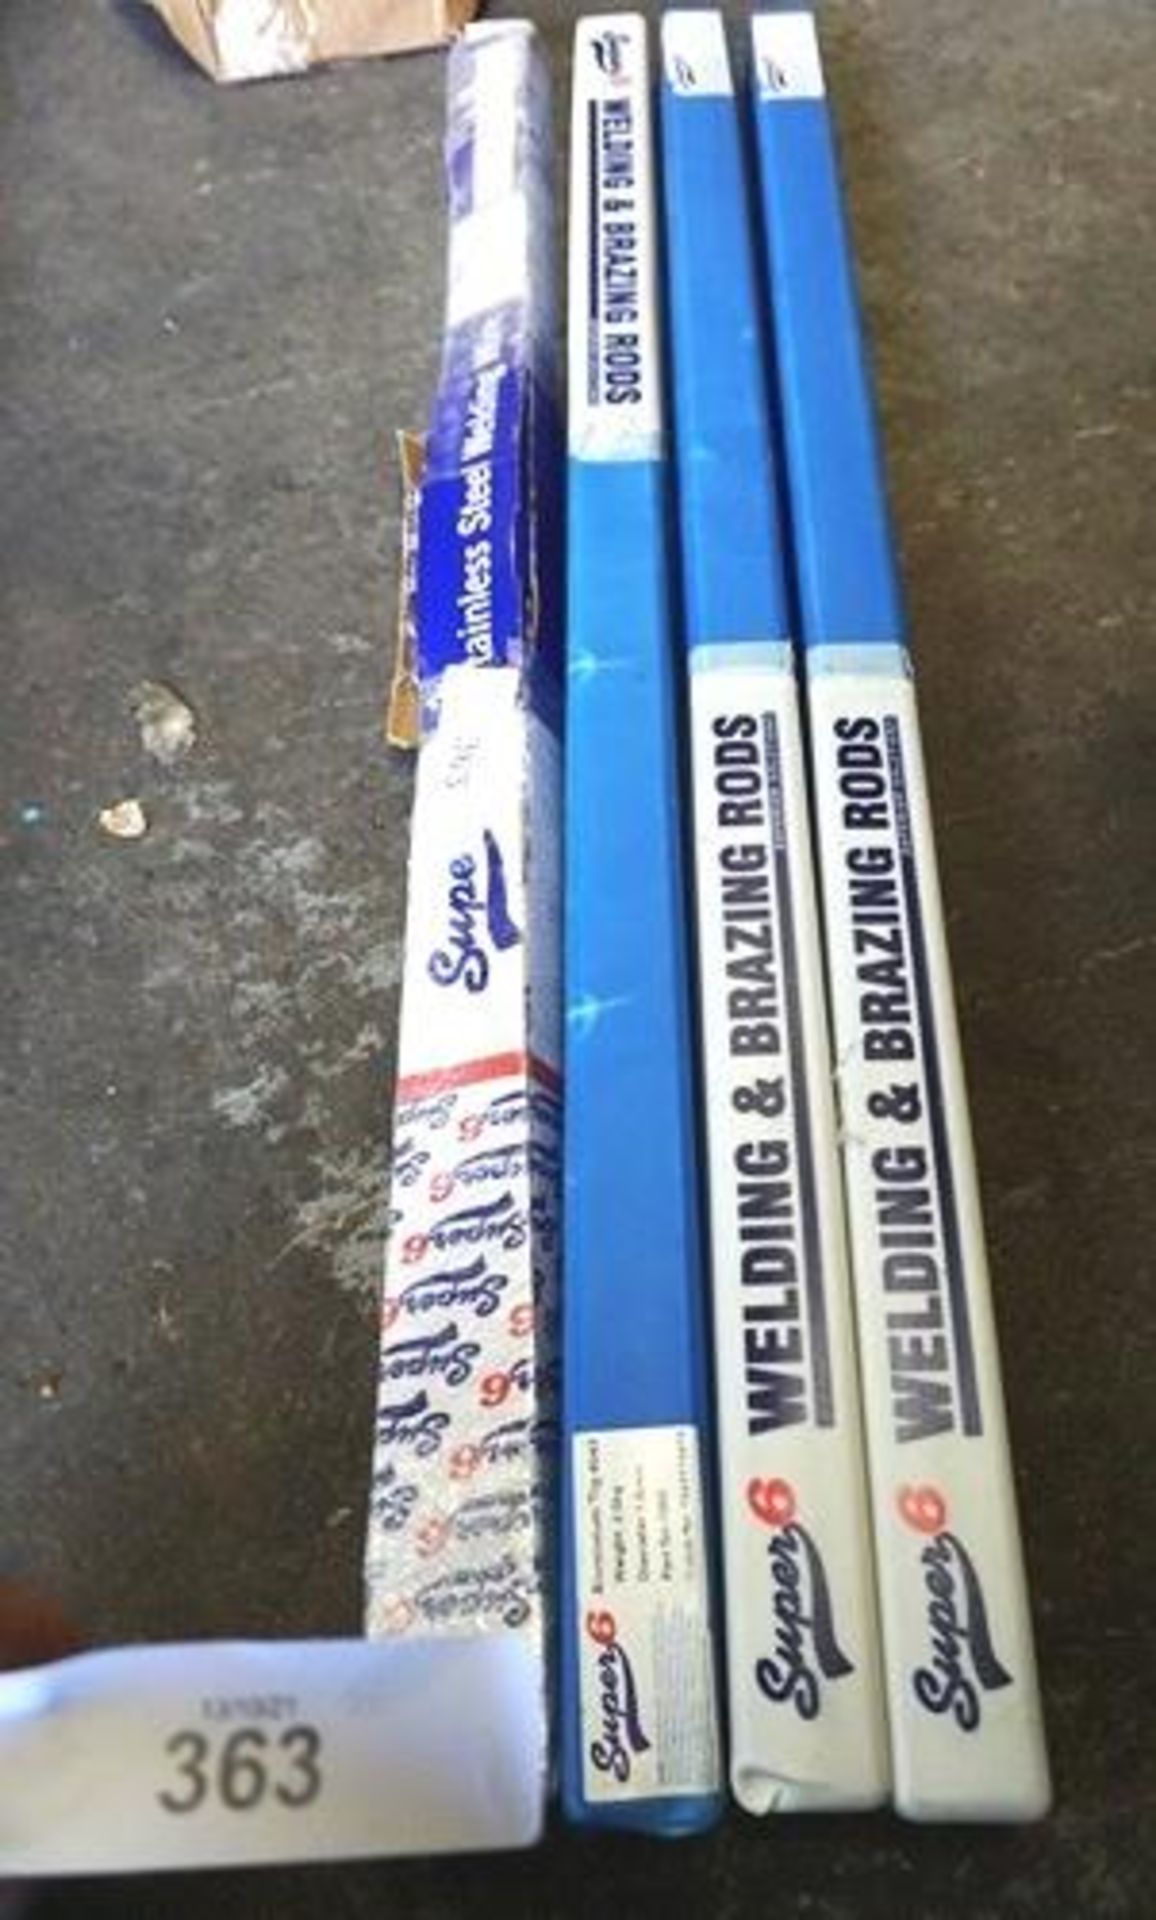 4 x packs of Super 6 comprising 3 x aluminium Tig 4043 1.6mm and 1 x stainless steel tig welding